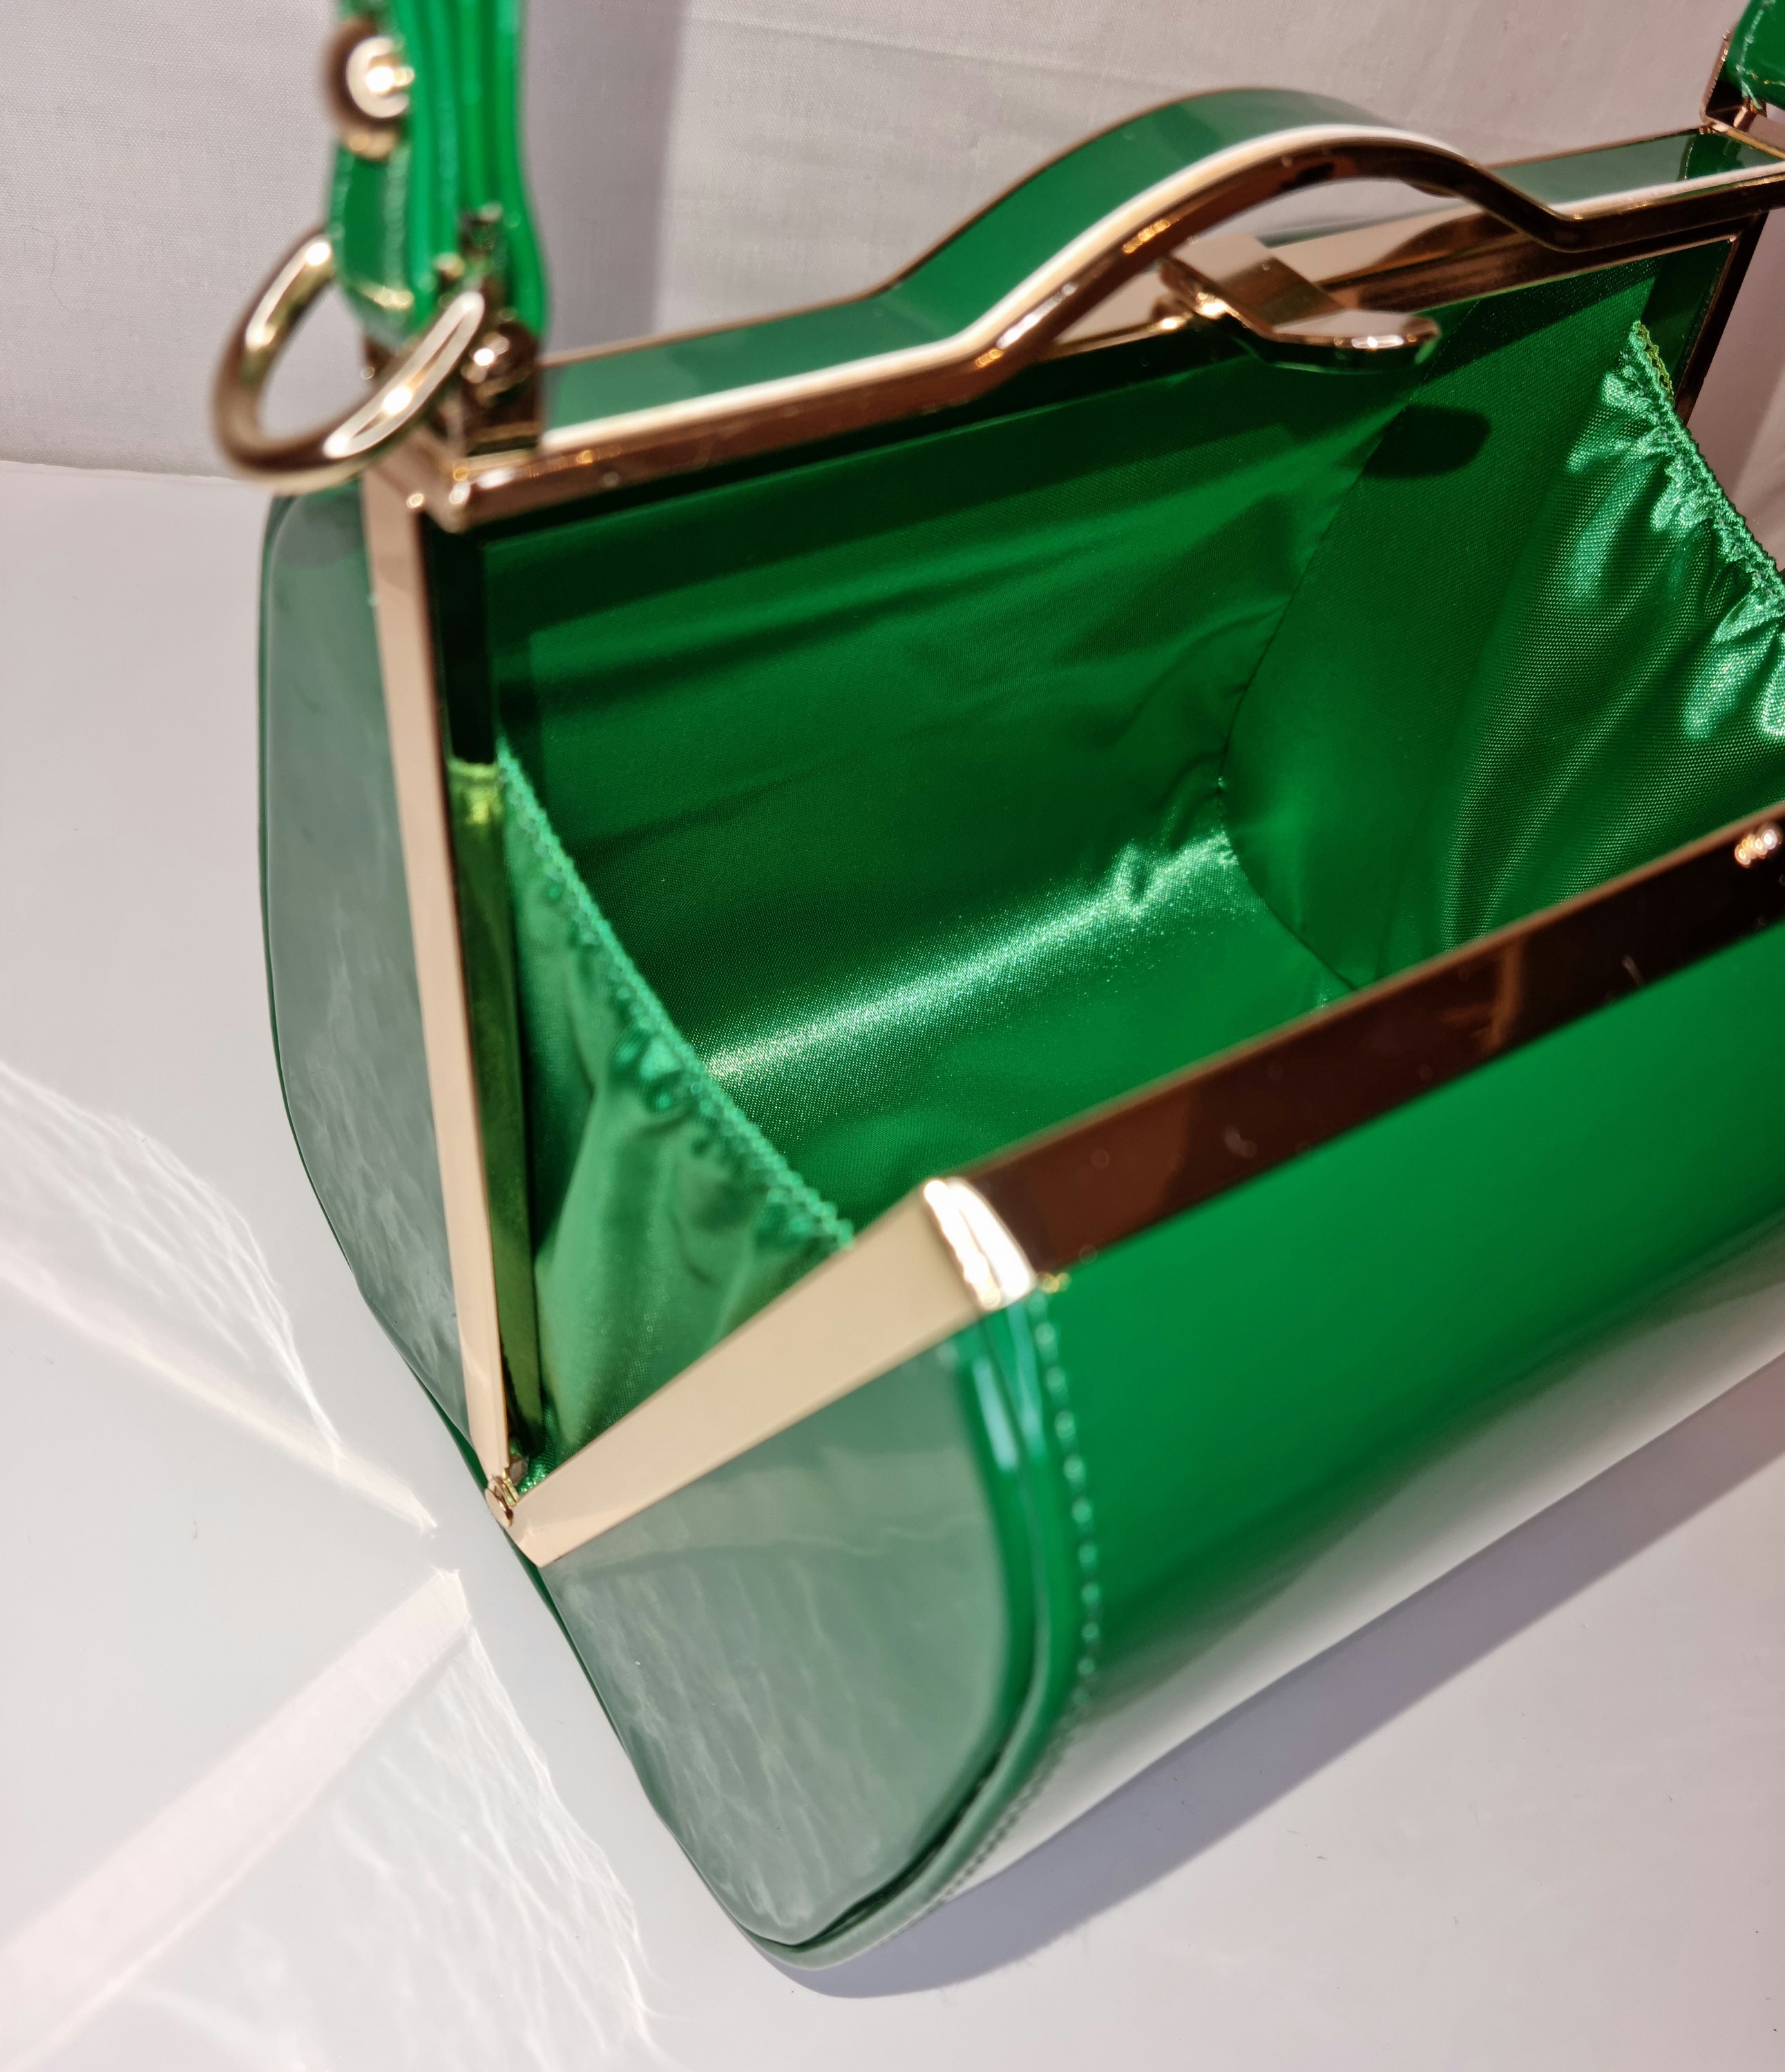 Tods Patent Leather Green Patent Leather Shoulder Bag – Cashinmybag